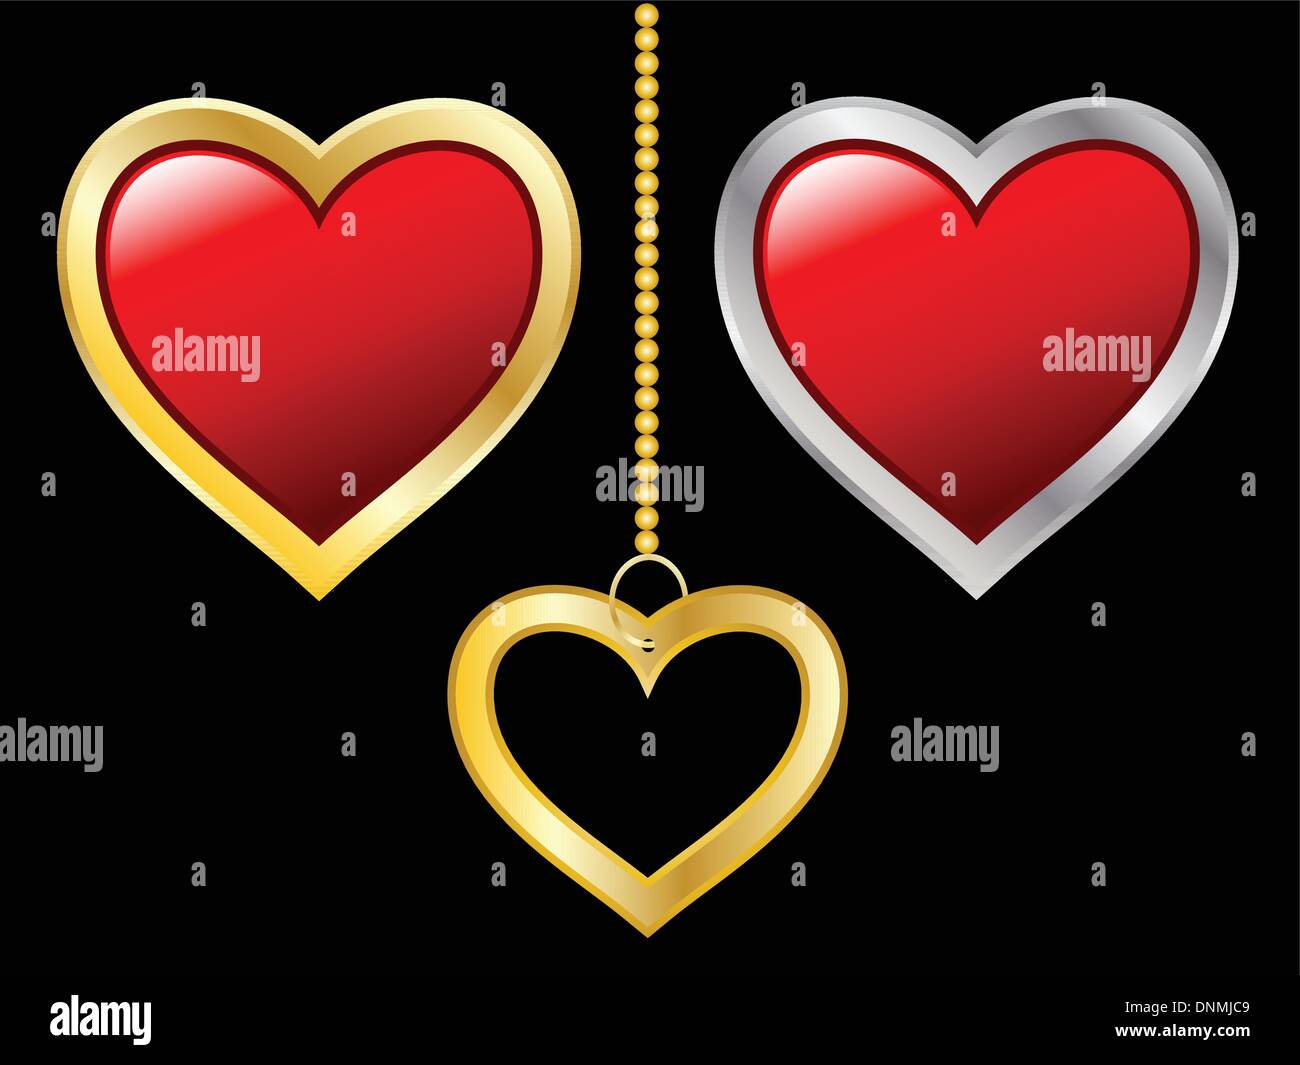 Various heart icons Stock Vector